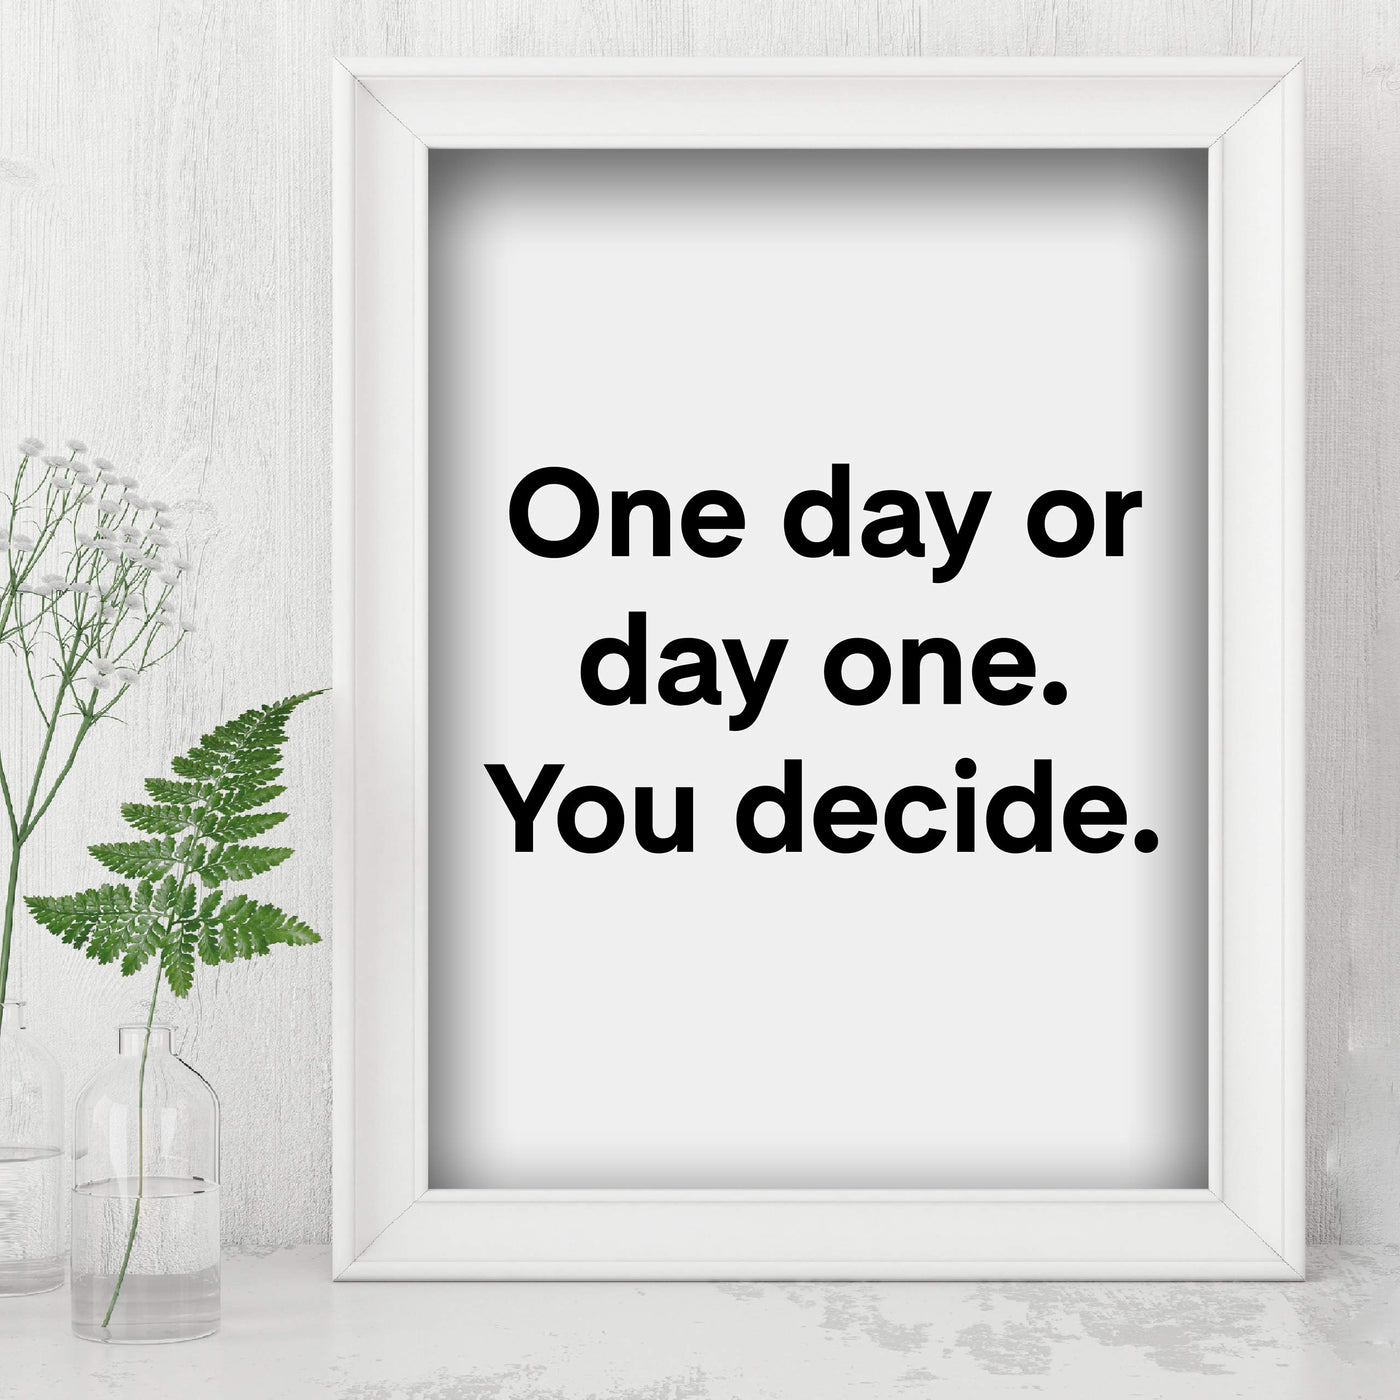 ?One Day or Day One-You Decide? Motivational Quotes Wall Art -8 x 10" Modern Typographic Poster Print-Ready to Frame. Inspirational Decor for Home-Office-School-Gym. Great Sign for Motivation!